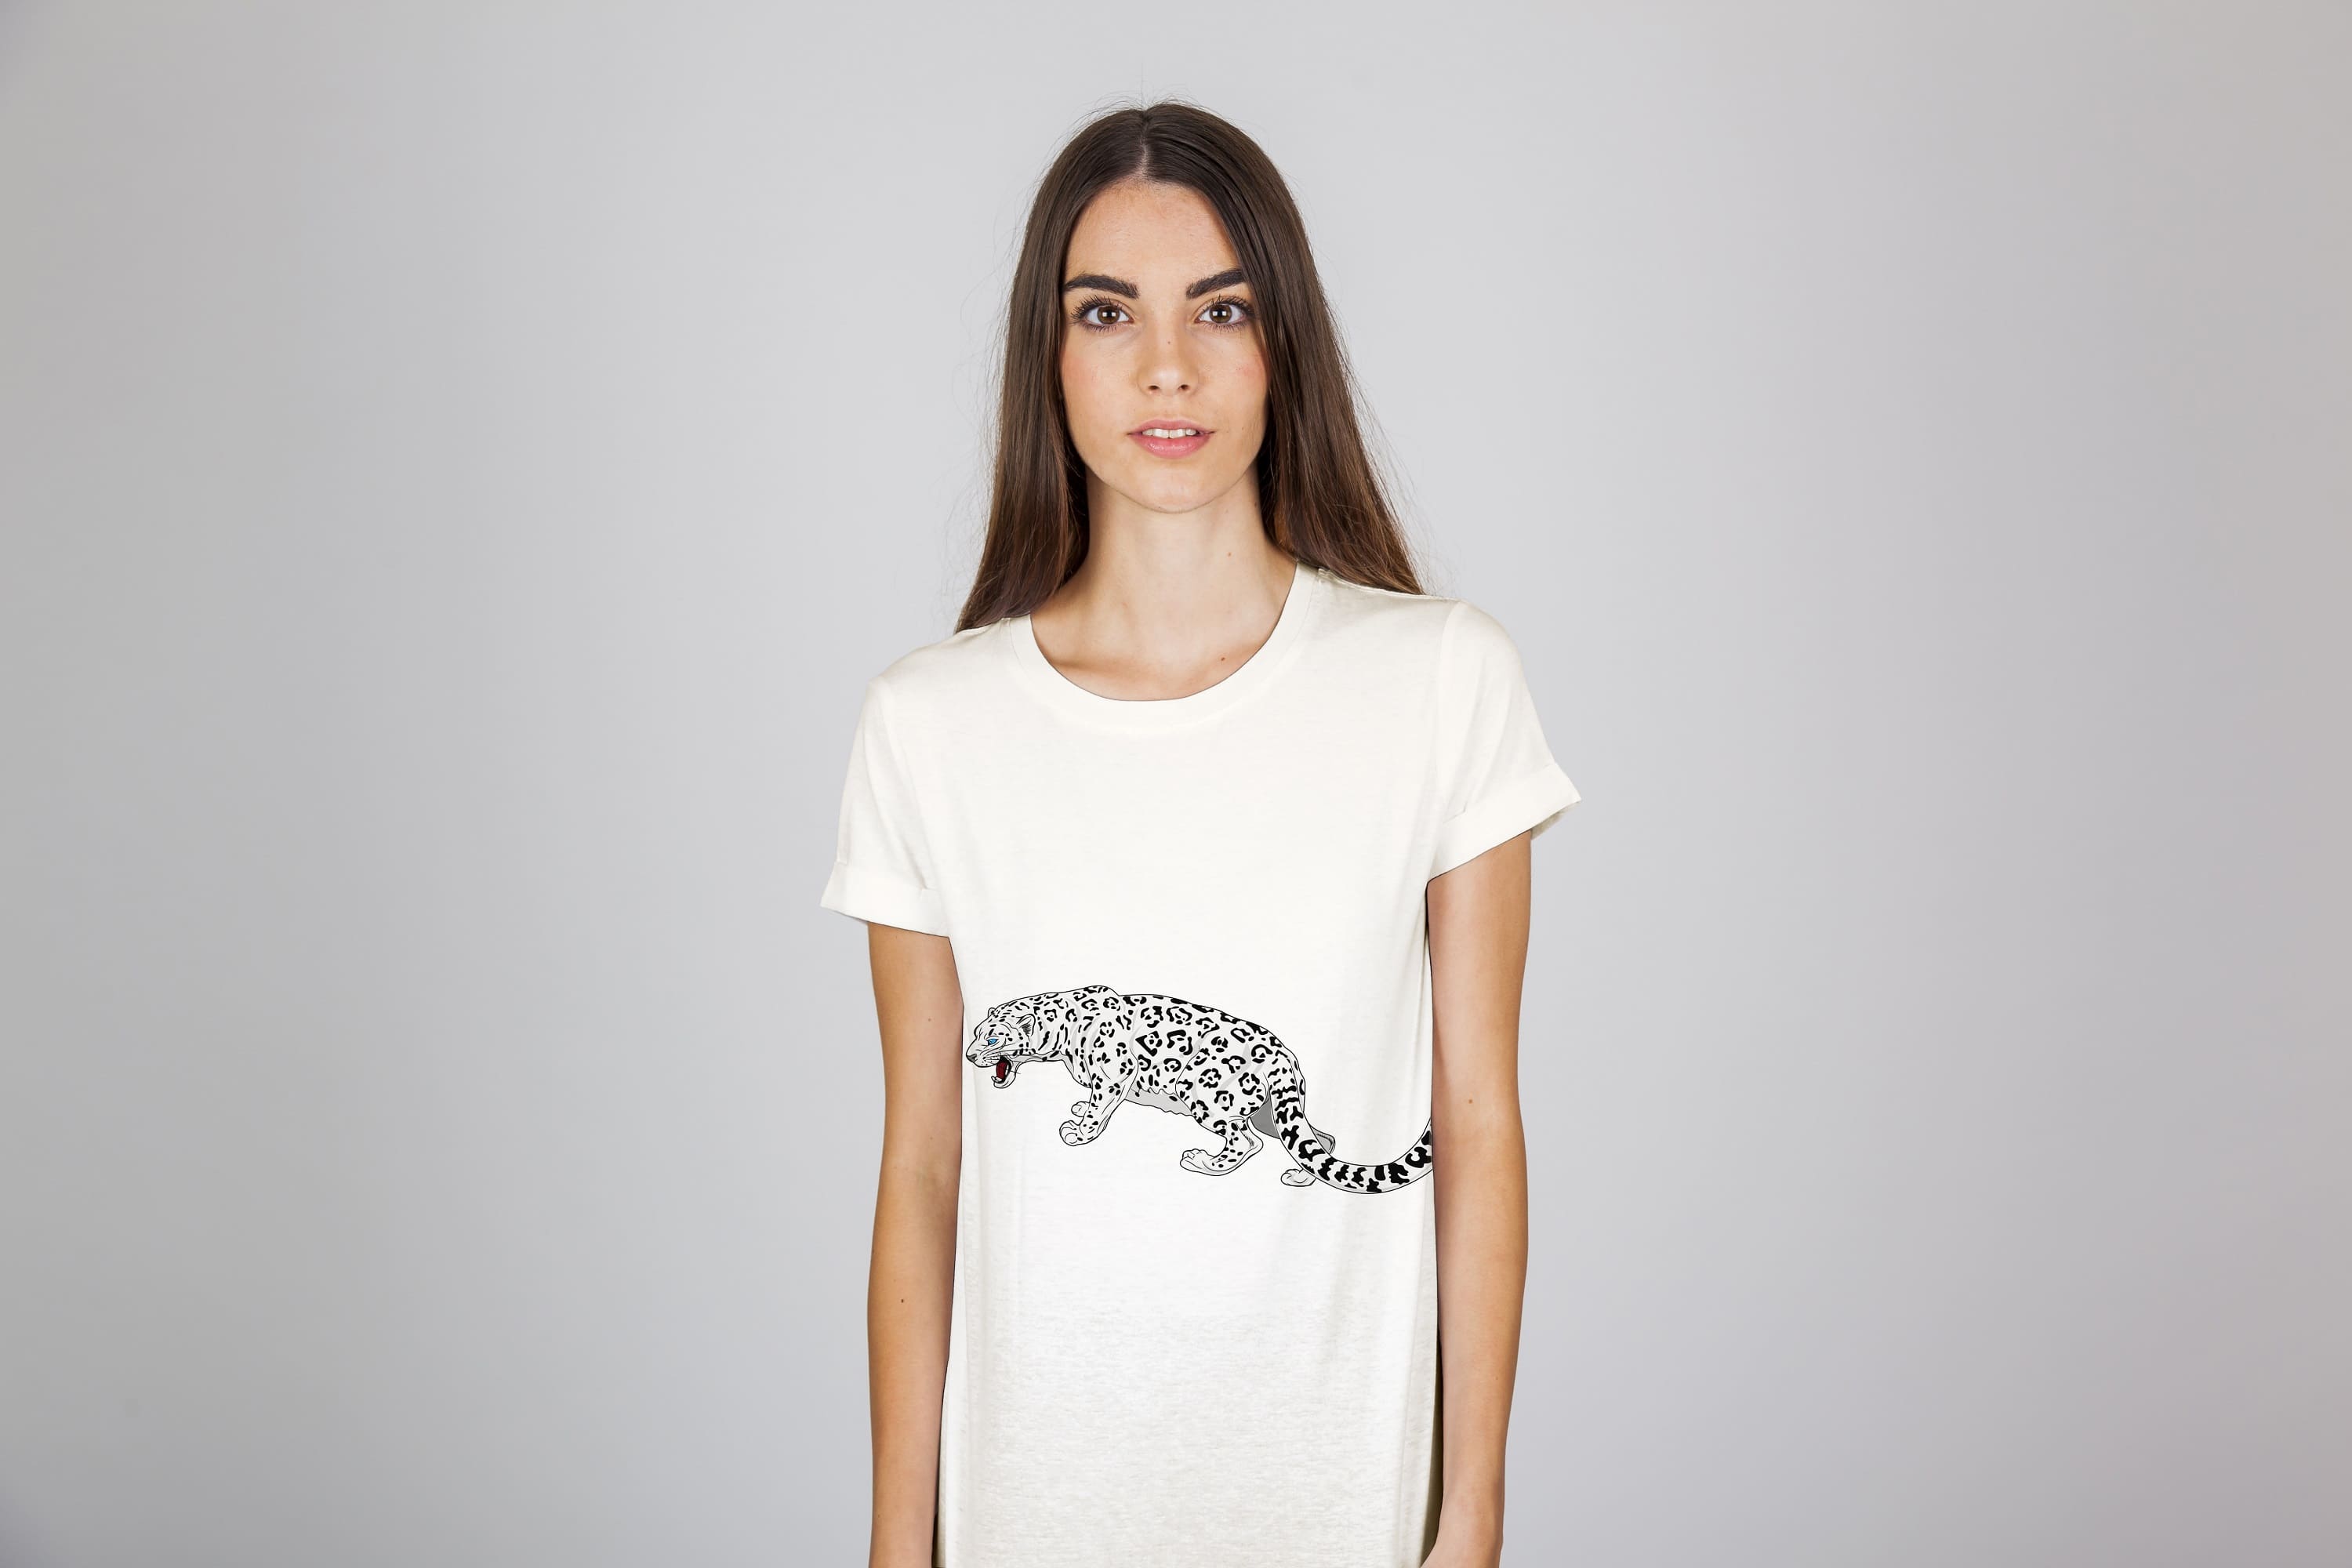 A snow leopard in a fighting pose on a white t-shirt.